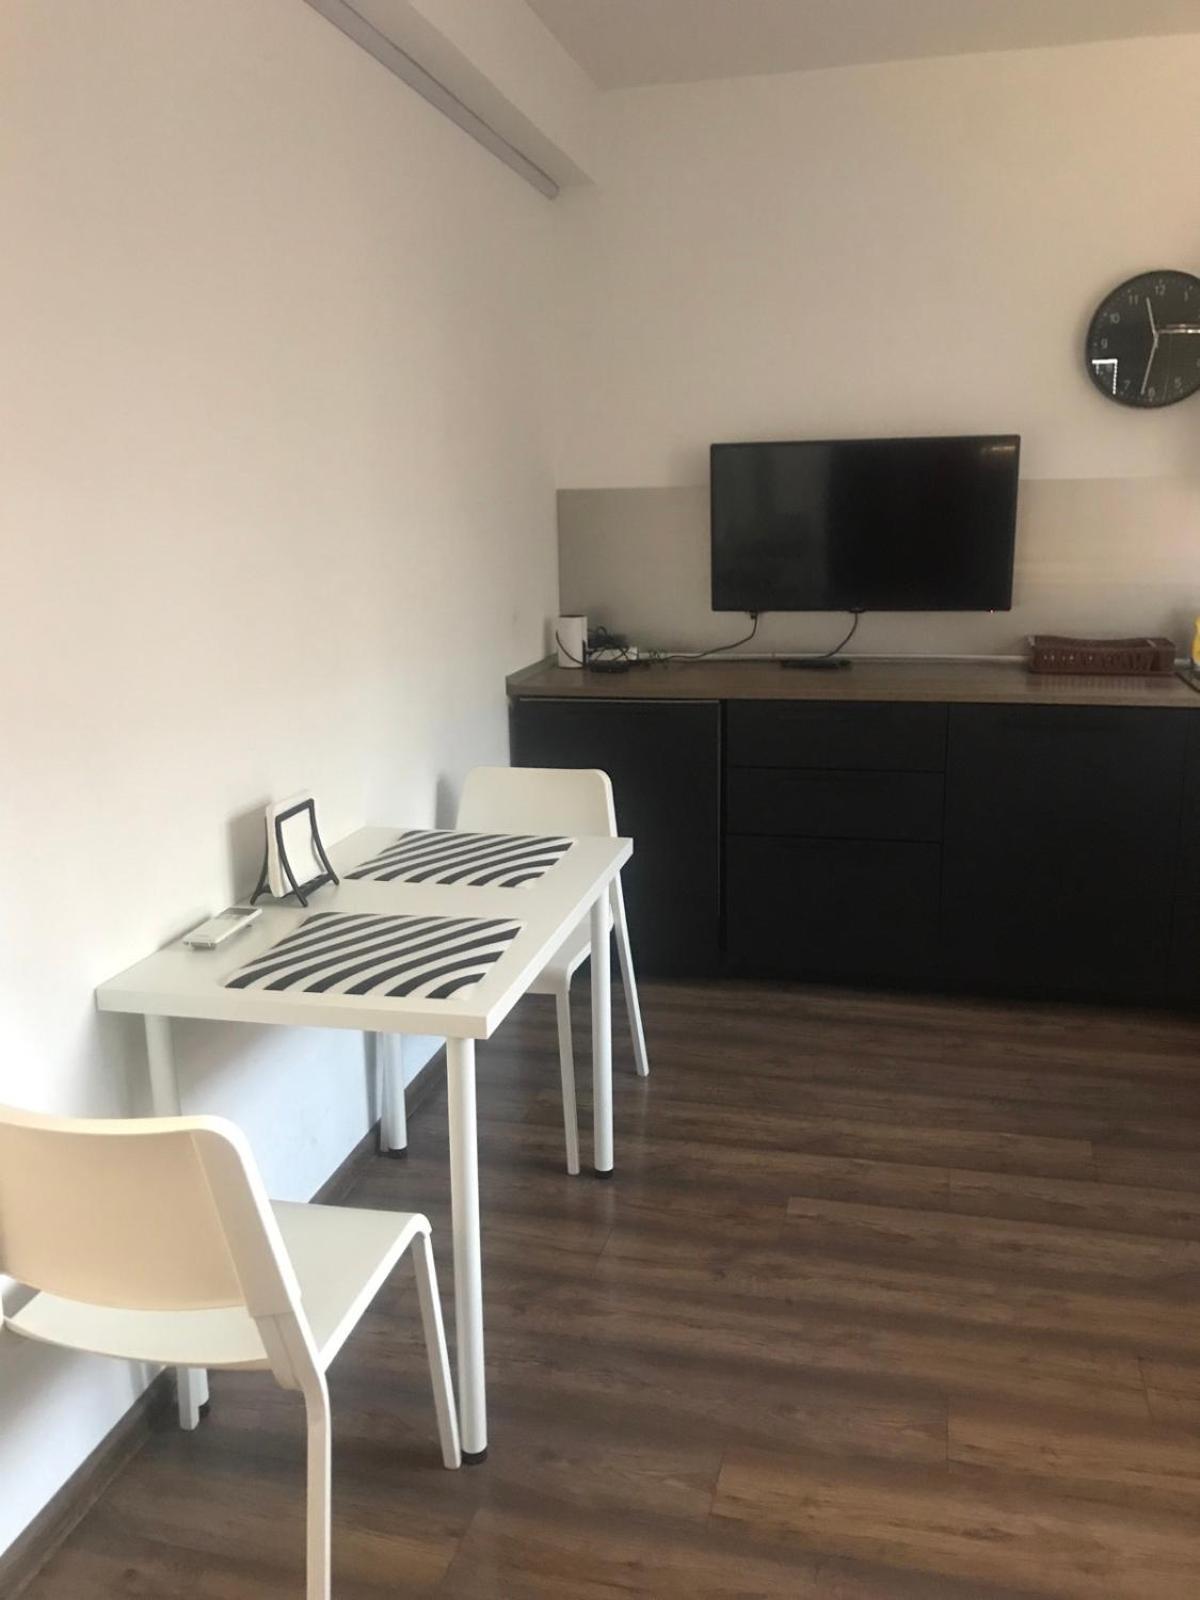 Self-Check Apartment Lilia 3 Next Ot 24 Hours Food And Drink Shop And Free Parking Area София Экстерьер фото